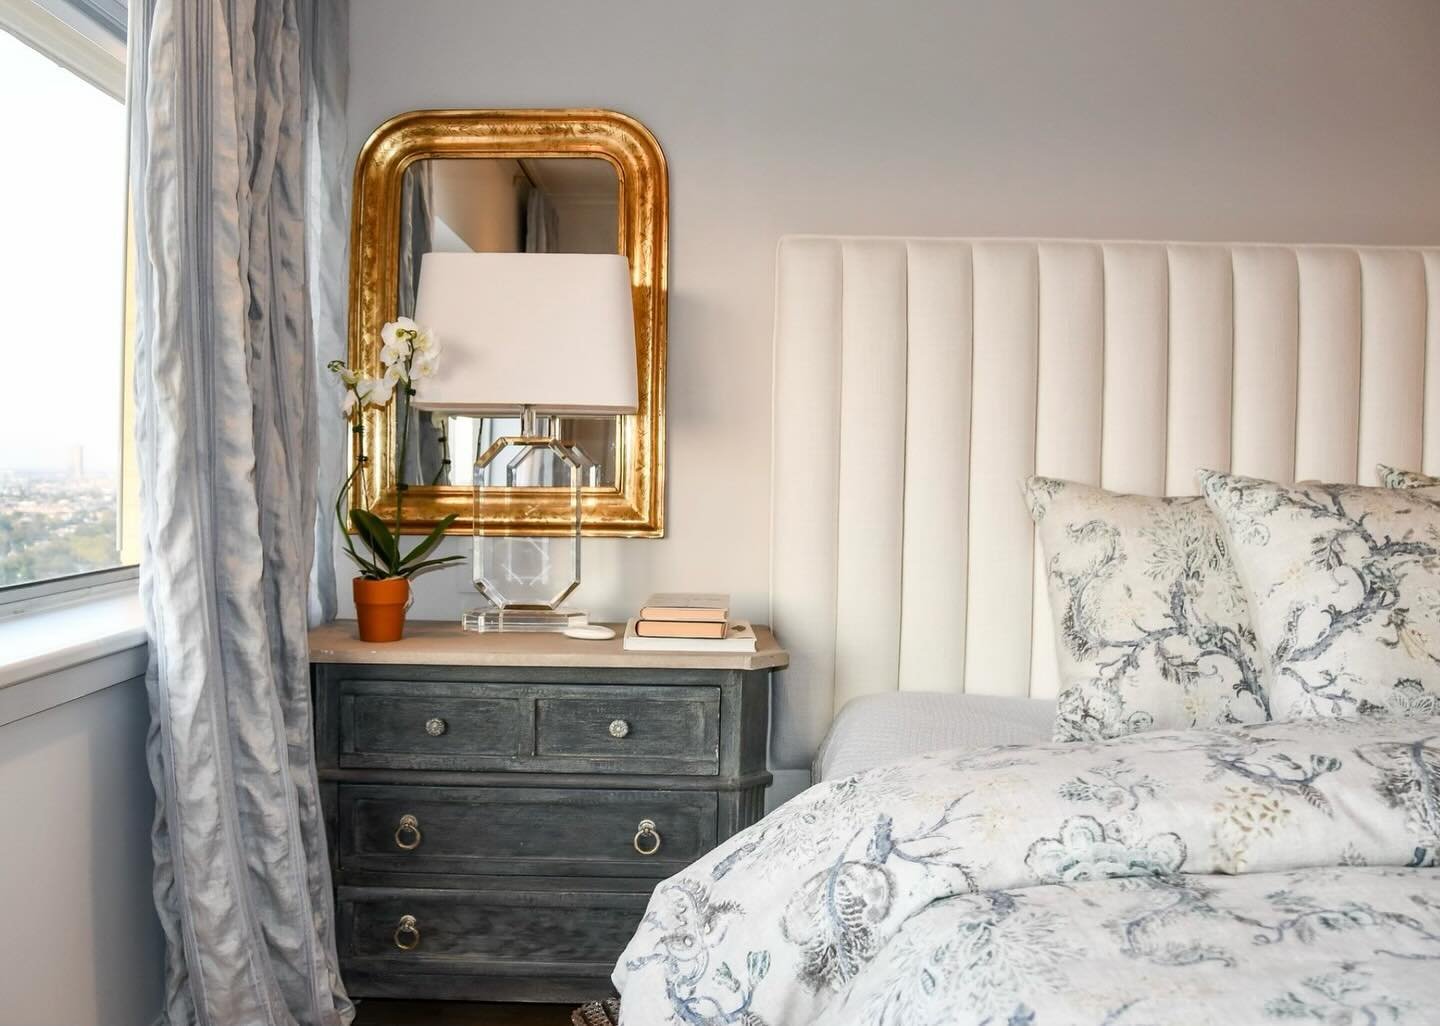 Rustic yet refined. 🌙✨ This nightstand brings warmth and character to the bedside. The perfect peaceful place to unwind after a long day. #kathebakerdesign
&bull;
&bull;
&bull;
#interiordesign #houstondesign #designdetails #homedesign #homesweethome